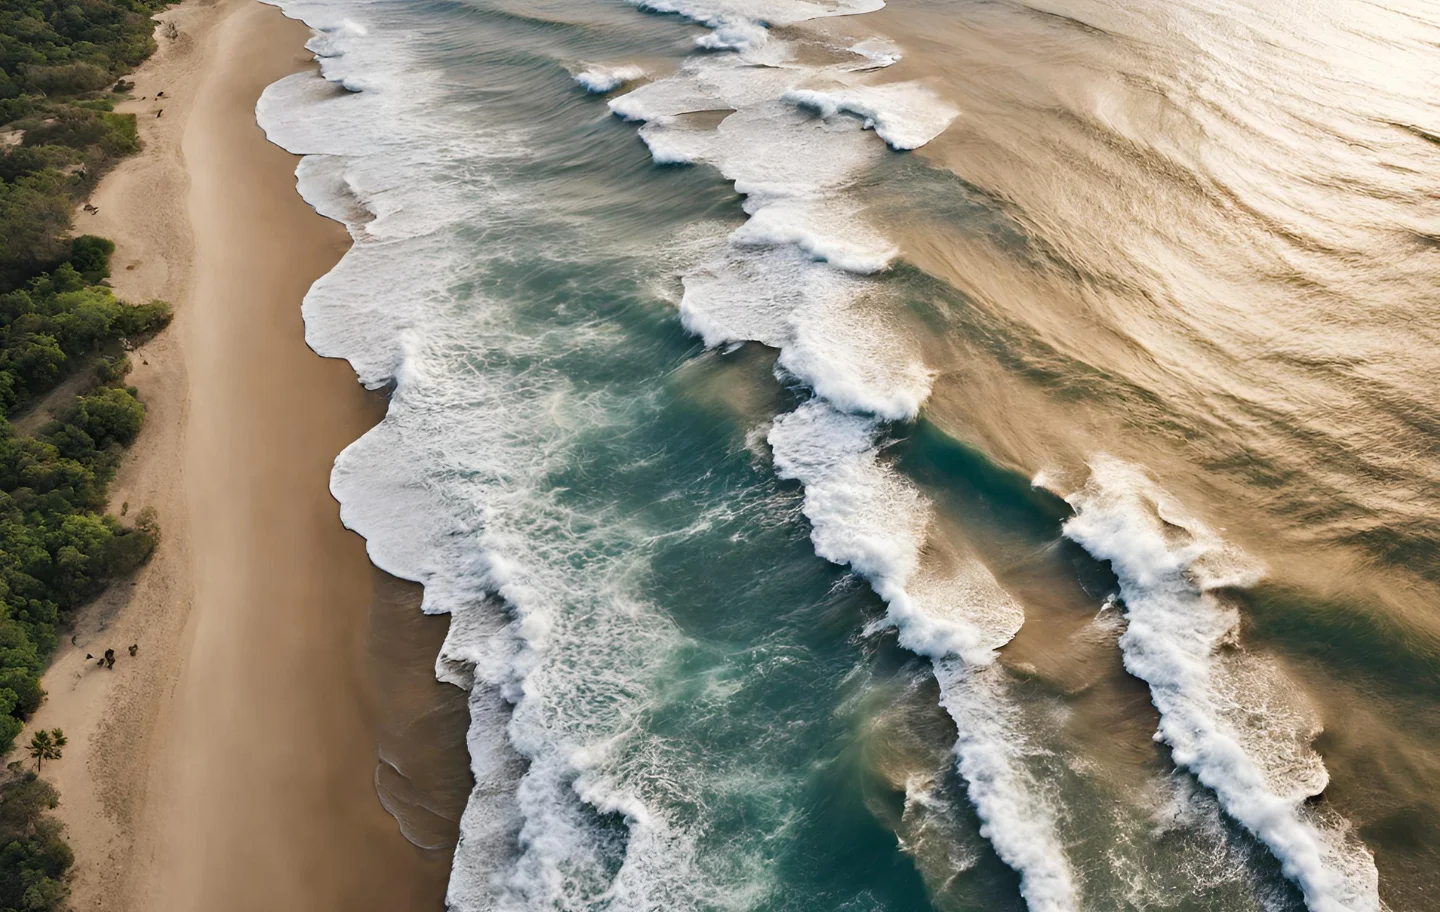 An aerial picture of clear water waves striking the shore depicting sustainable practices and COSPEC' Coworking's pledge to conserve environment.